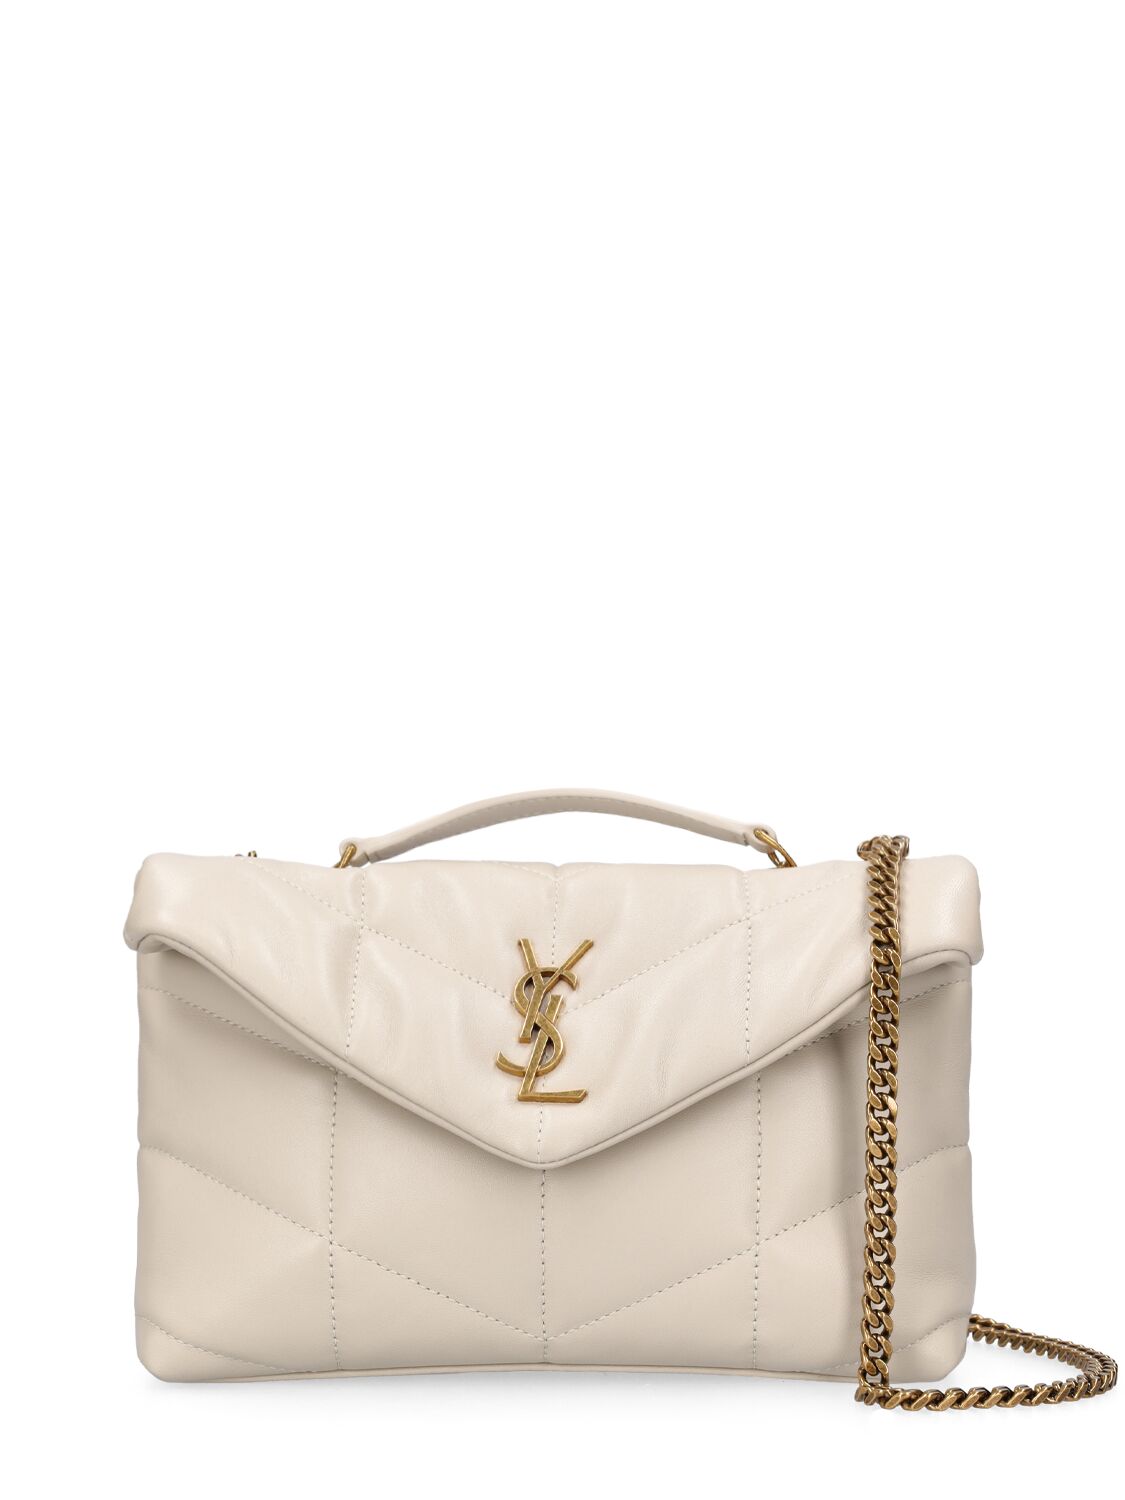 Saint Laurent Puffer Toy Quilted Leather Shoulder Bag In Crema Soft